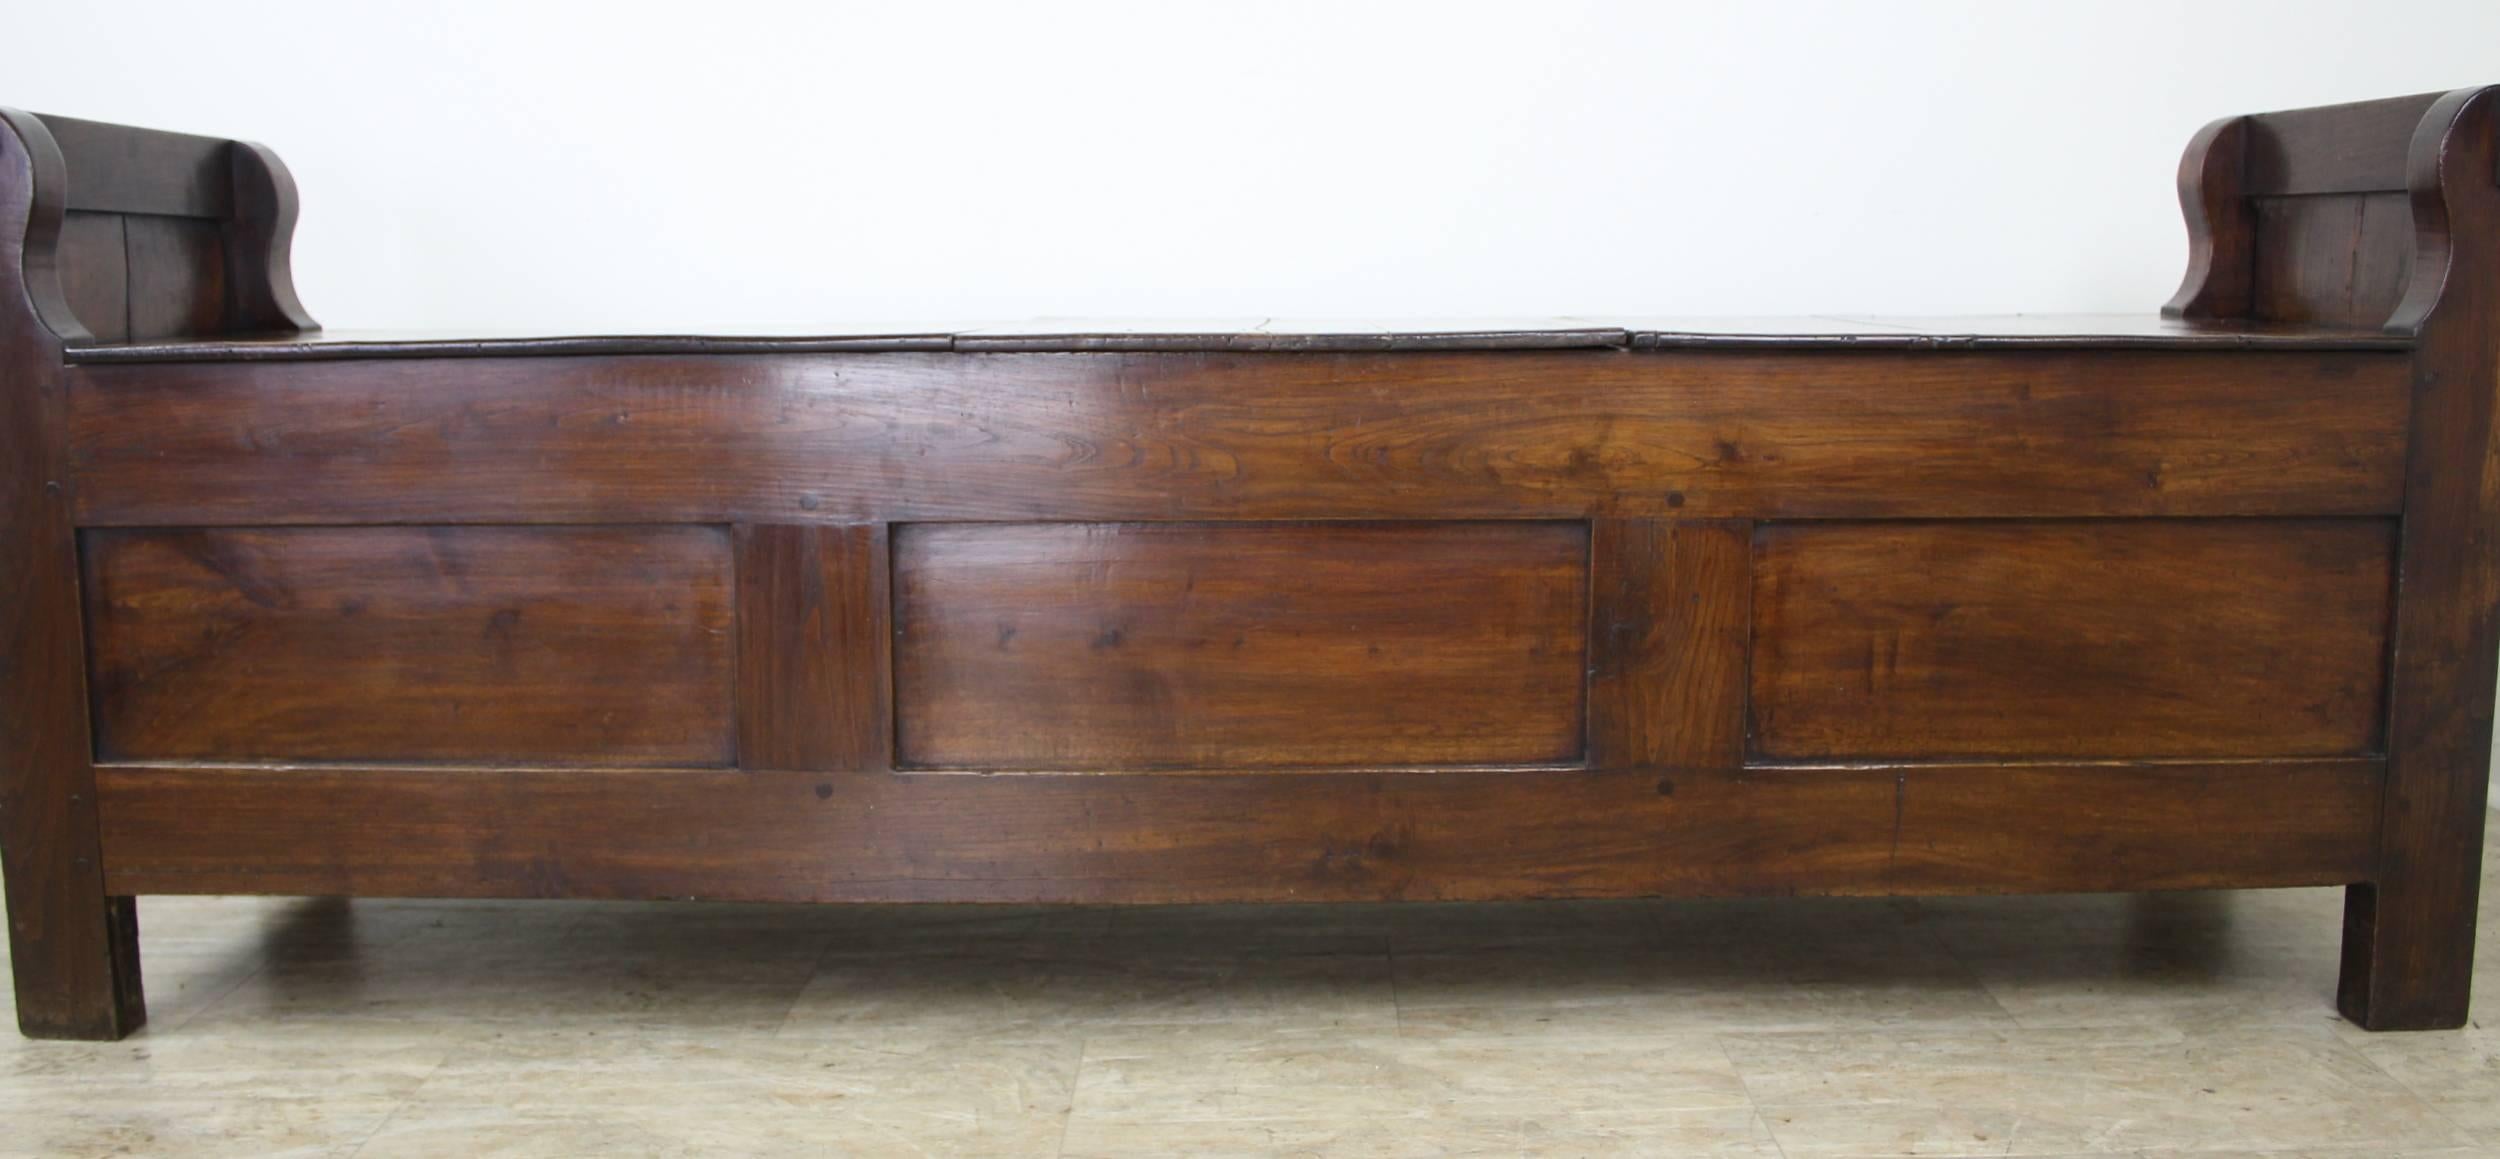 Late 19th Century Antique French Chestnut Coffer